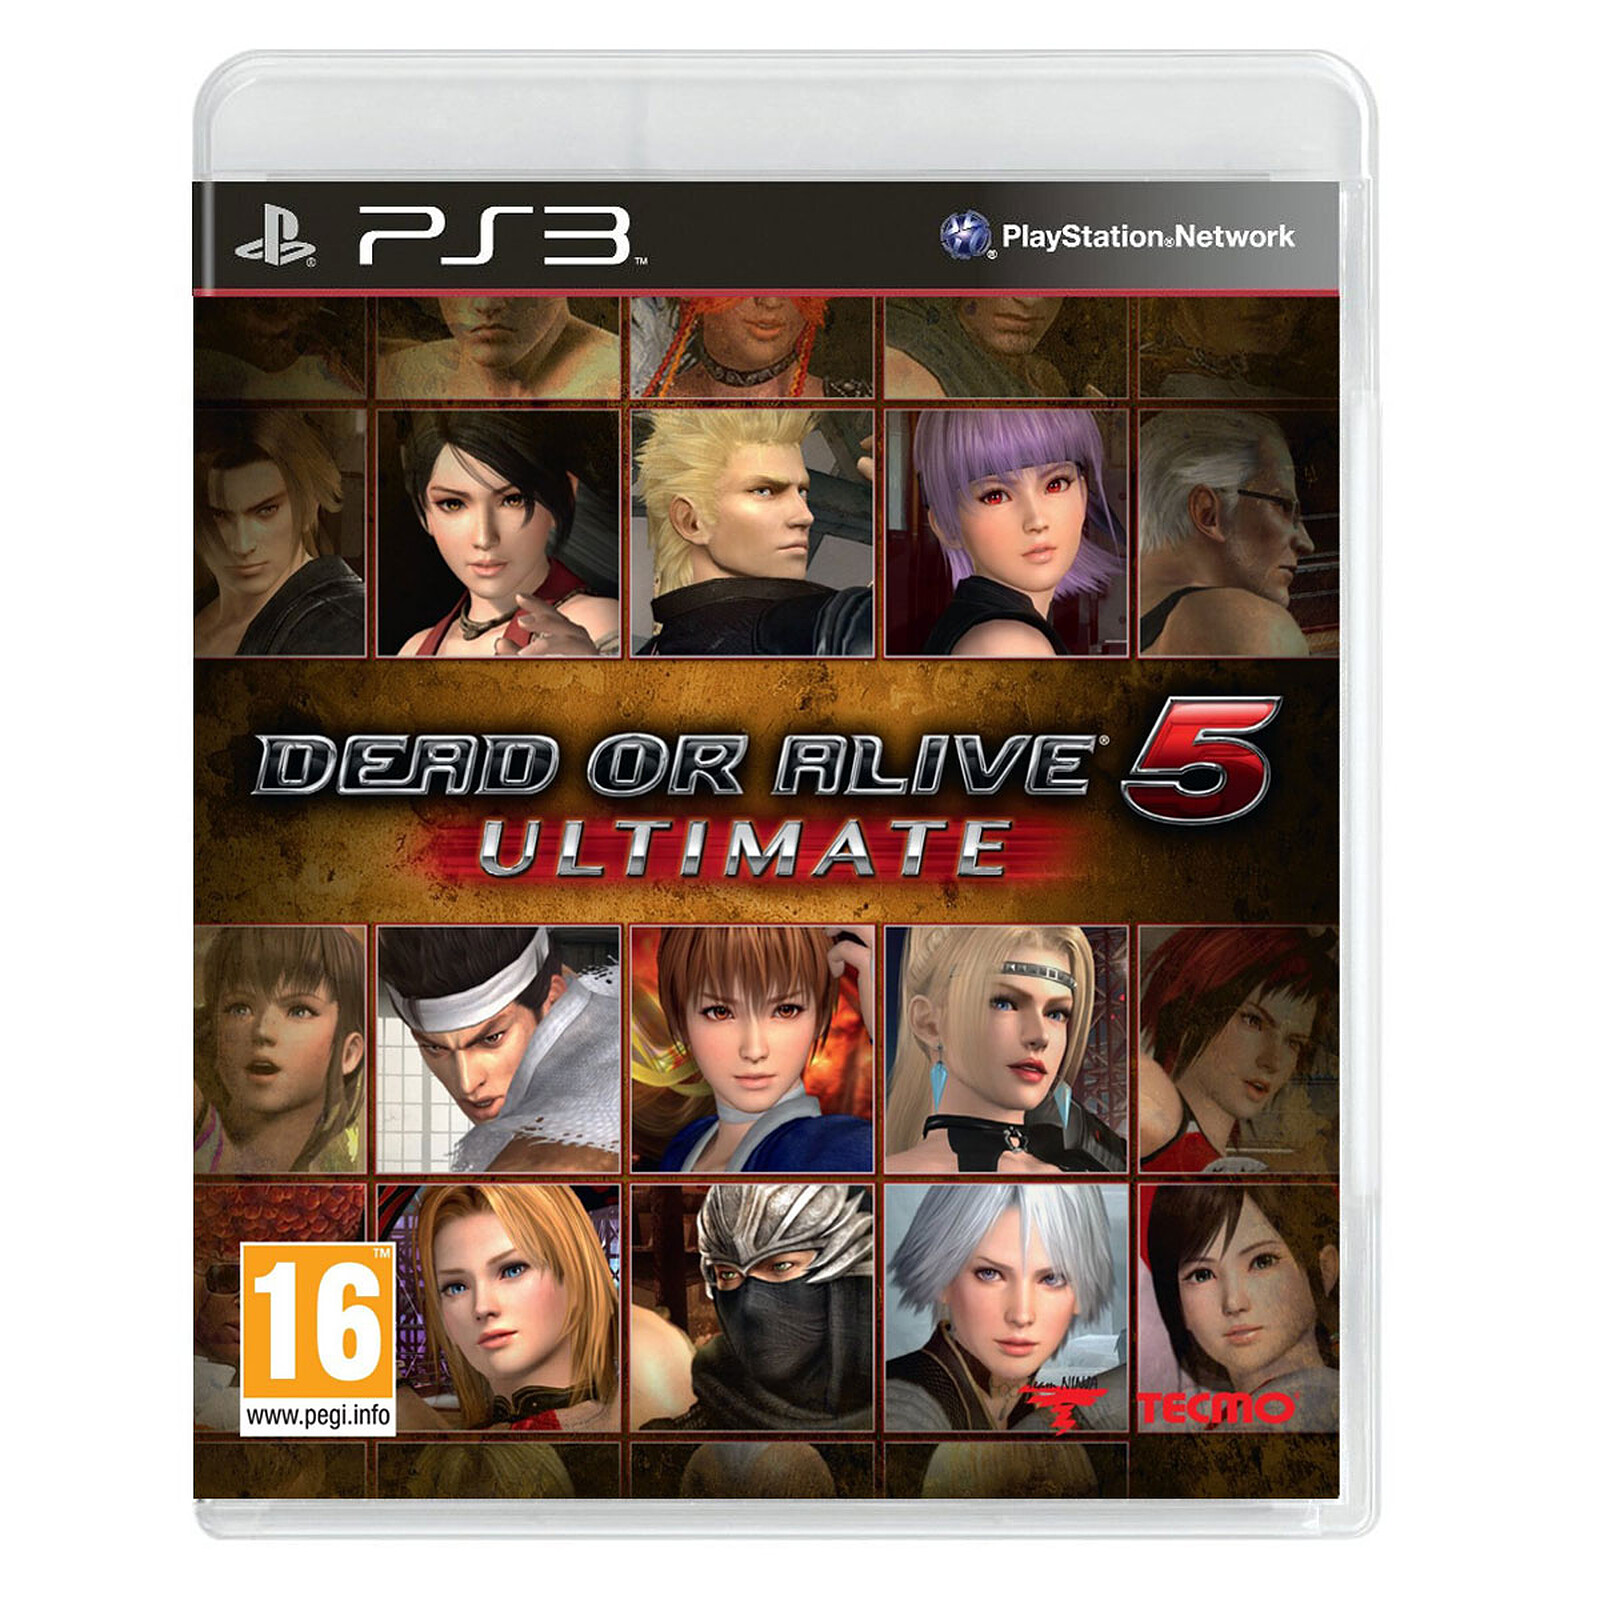 dead or alive 5 ps3 download free